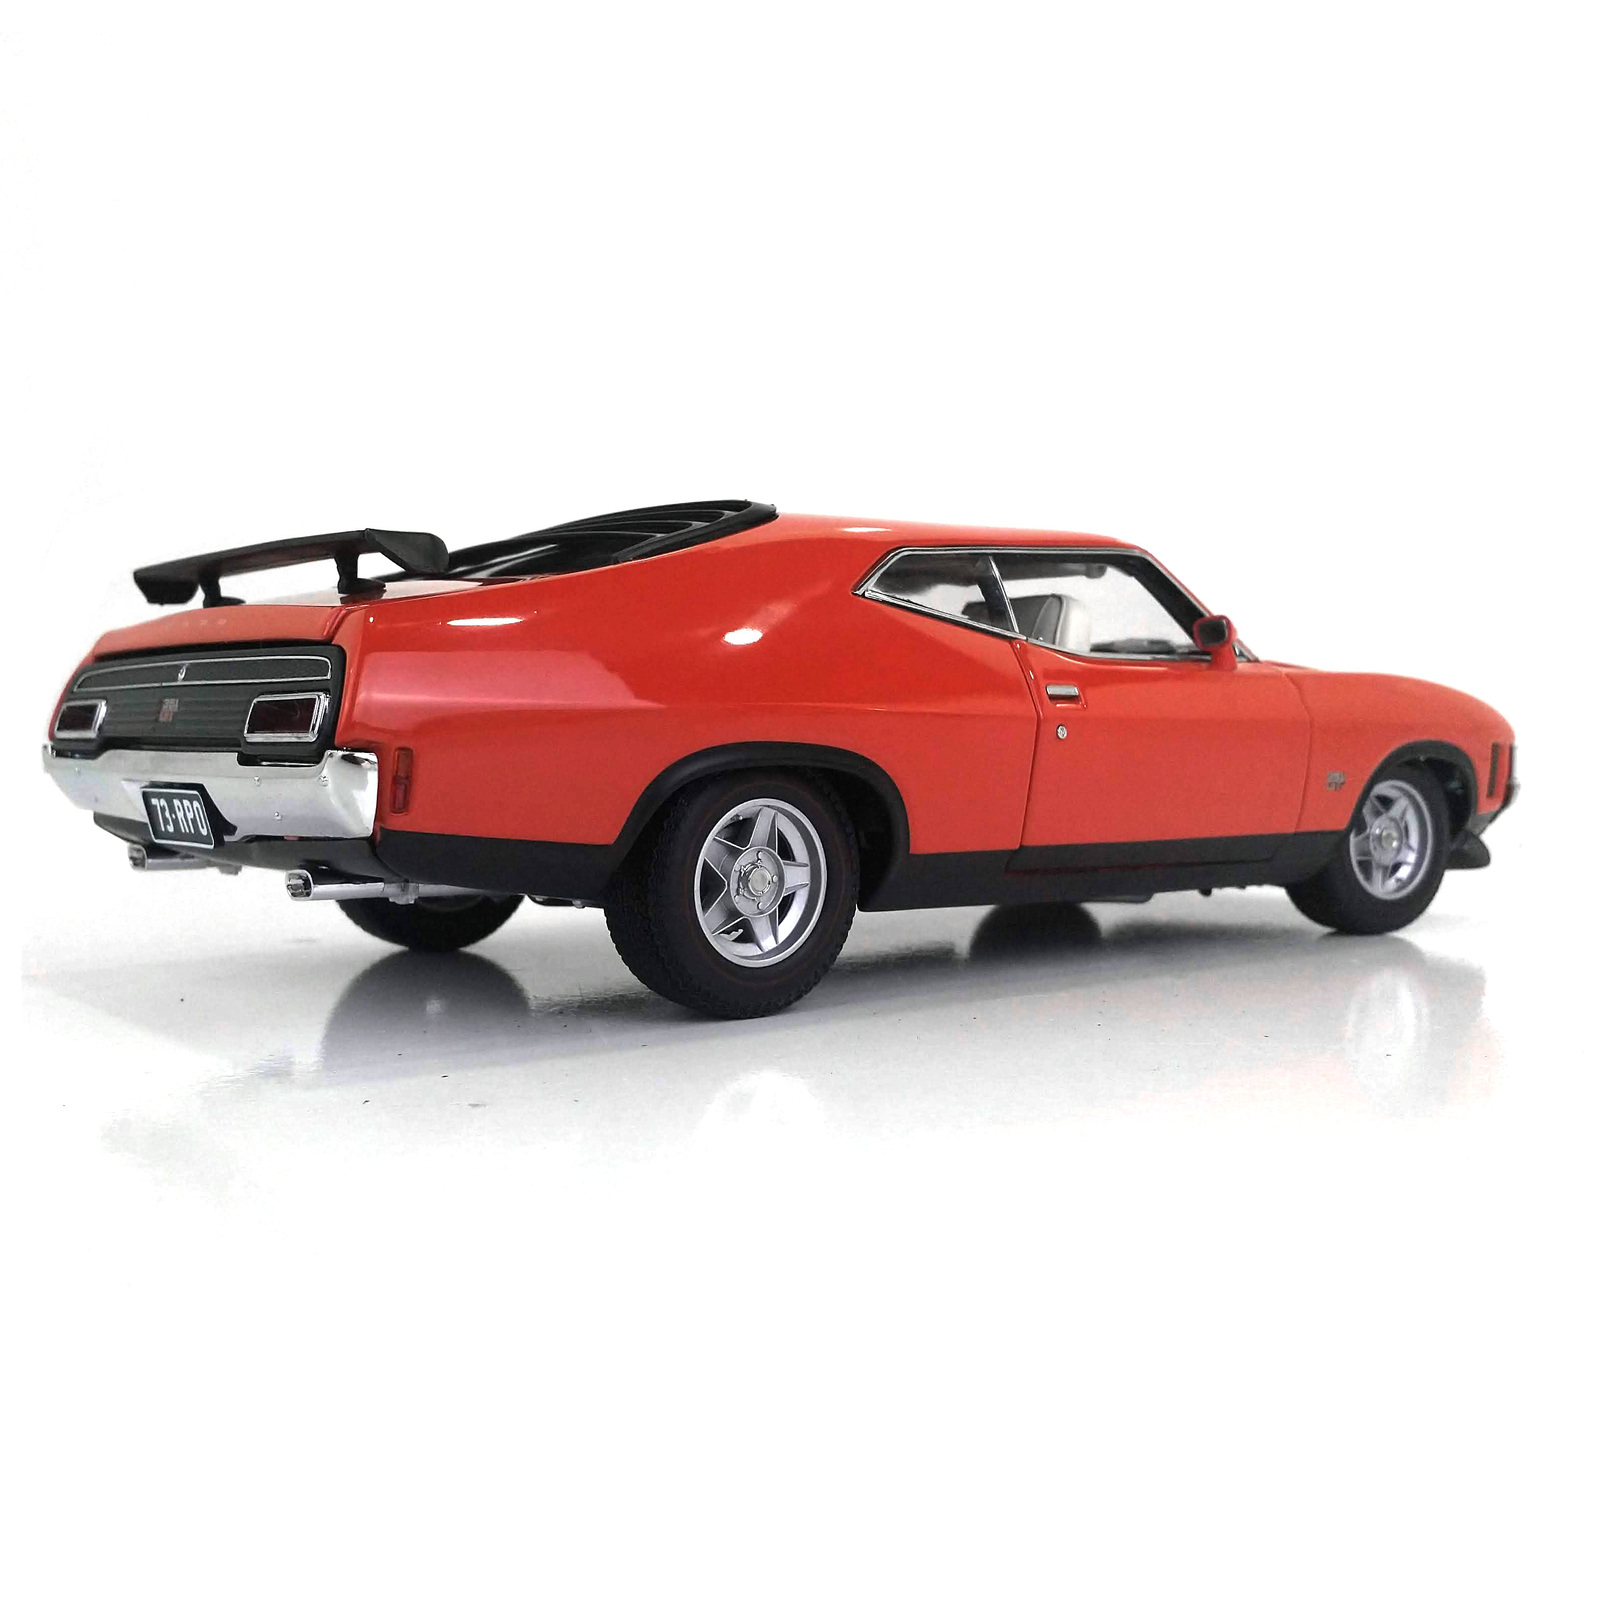 1:18 Ford XA Falcon Coupe - Red Pepper